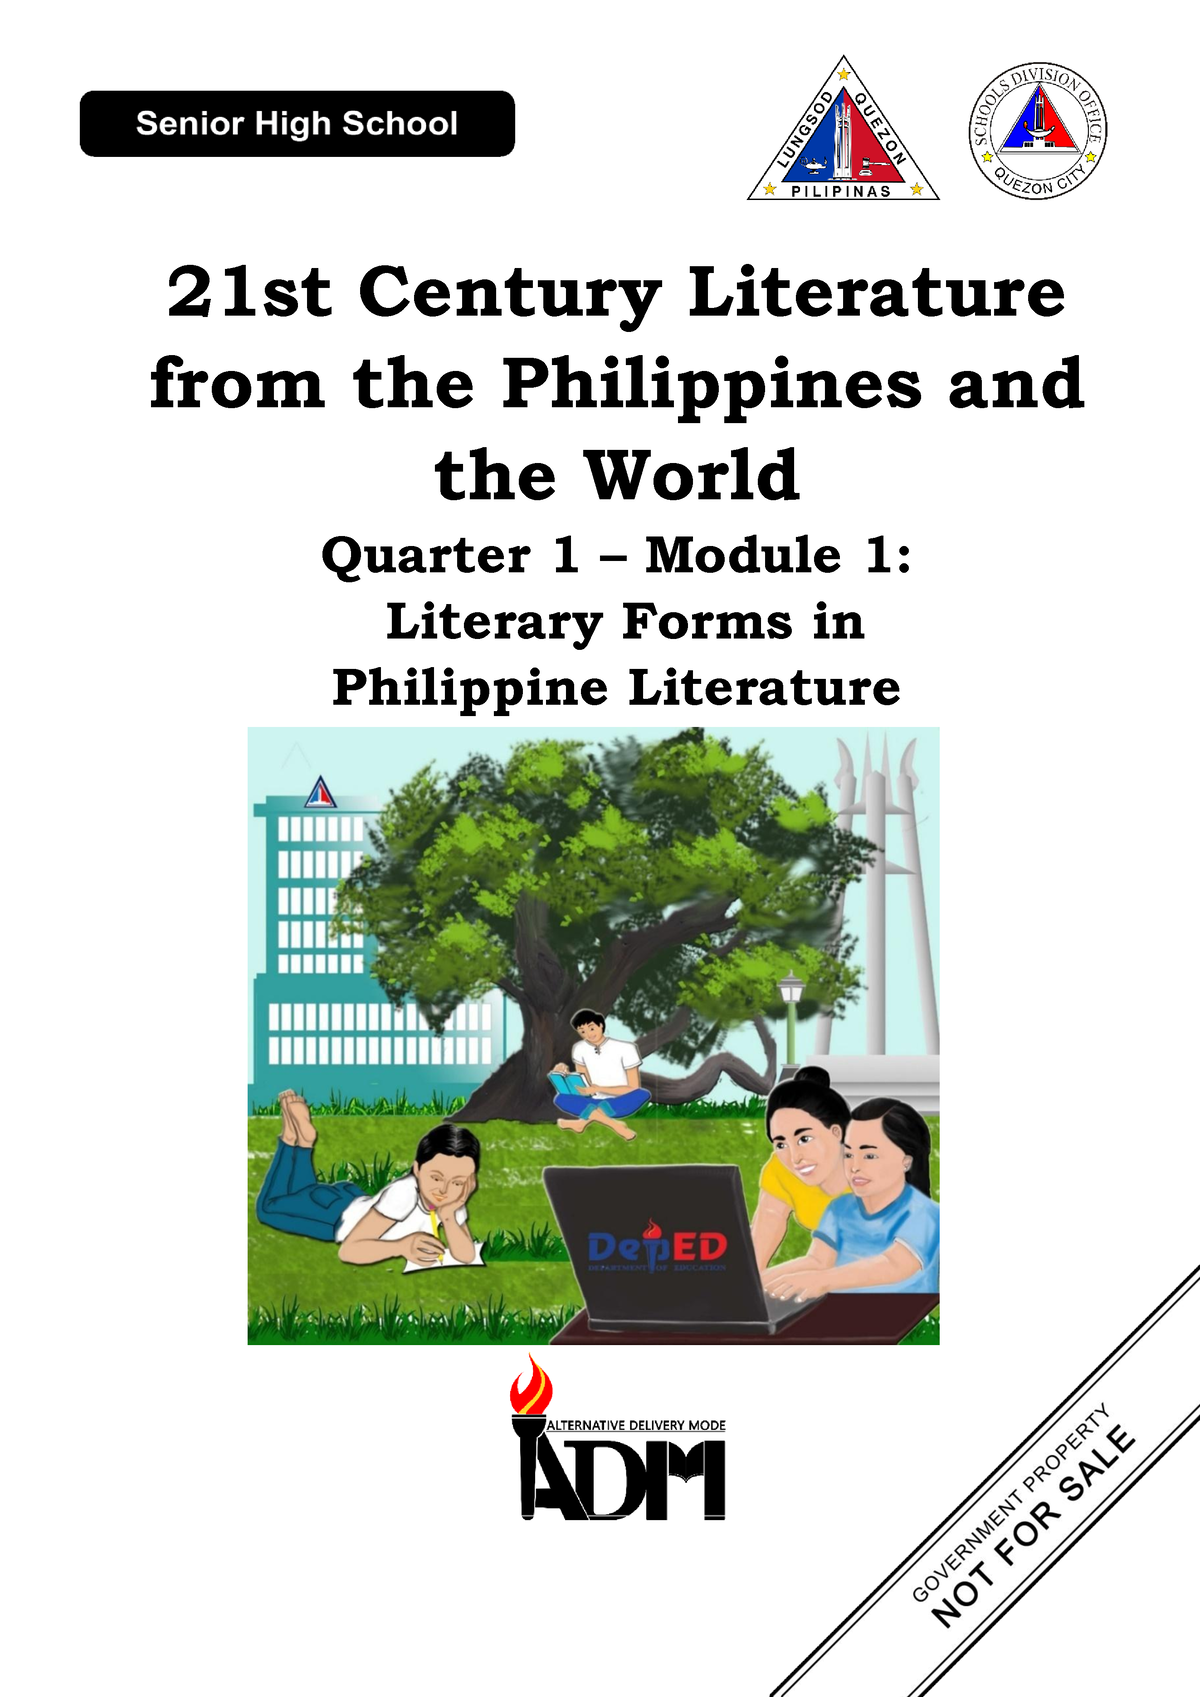 Pdf_21st literature - 21st Century Literature from the Philippines and ...